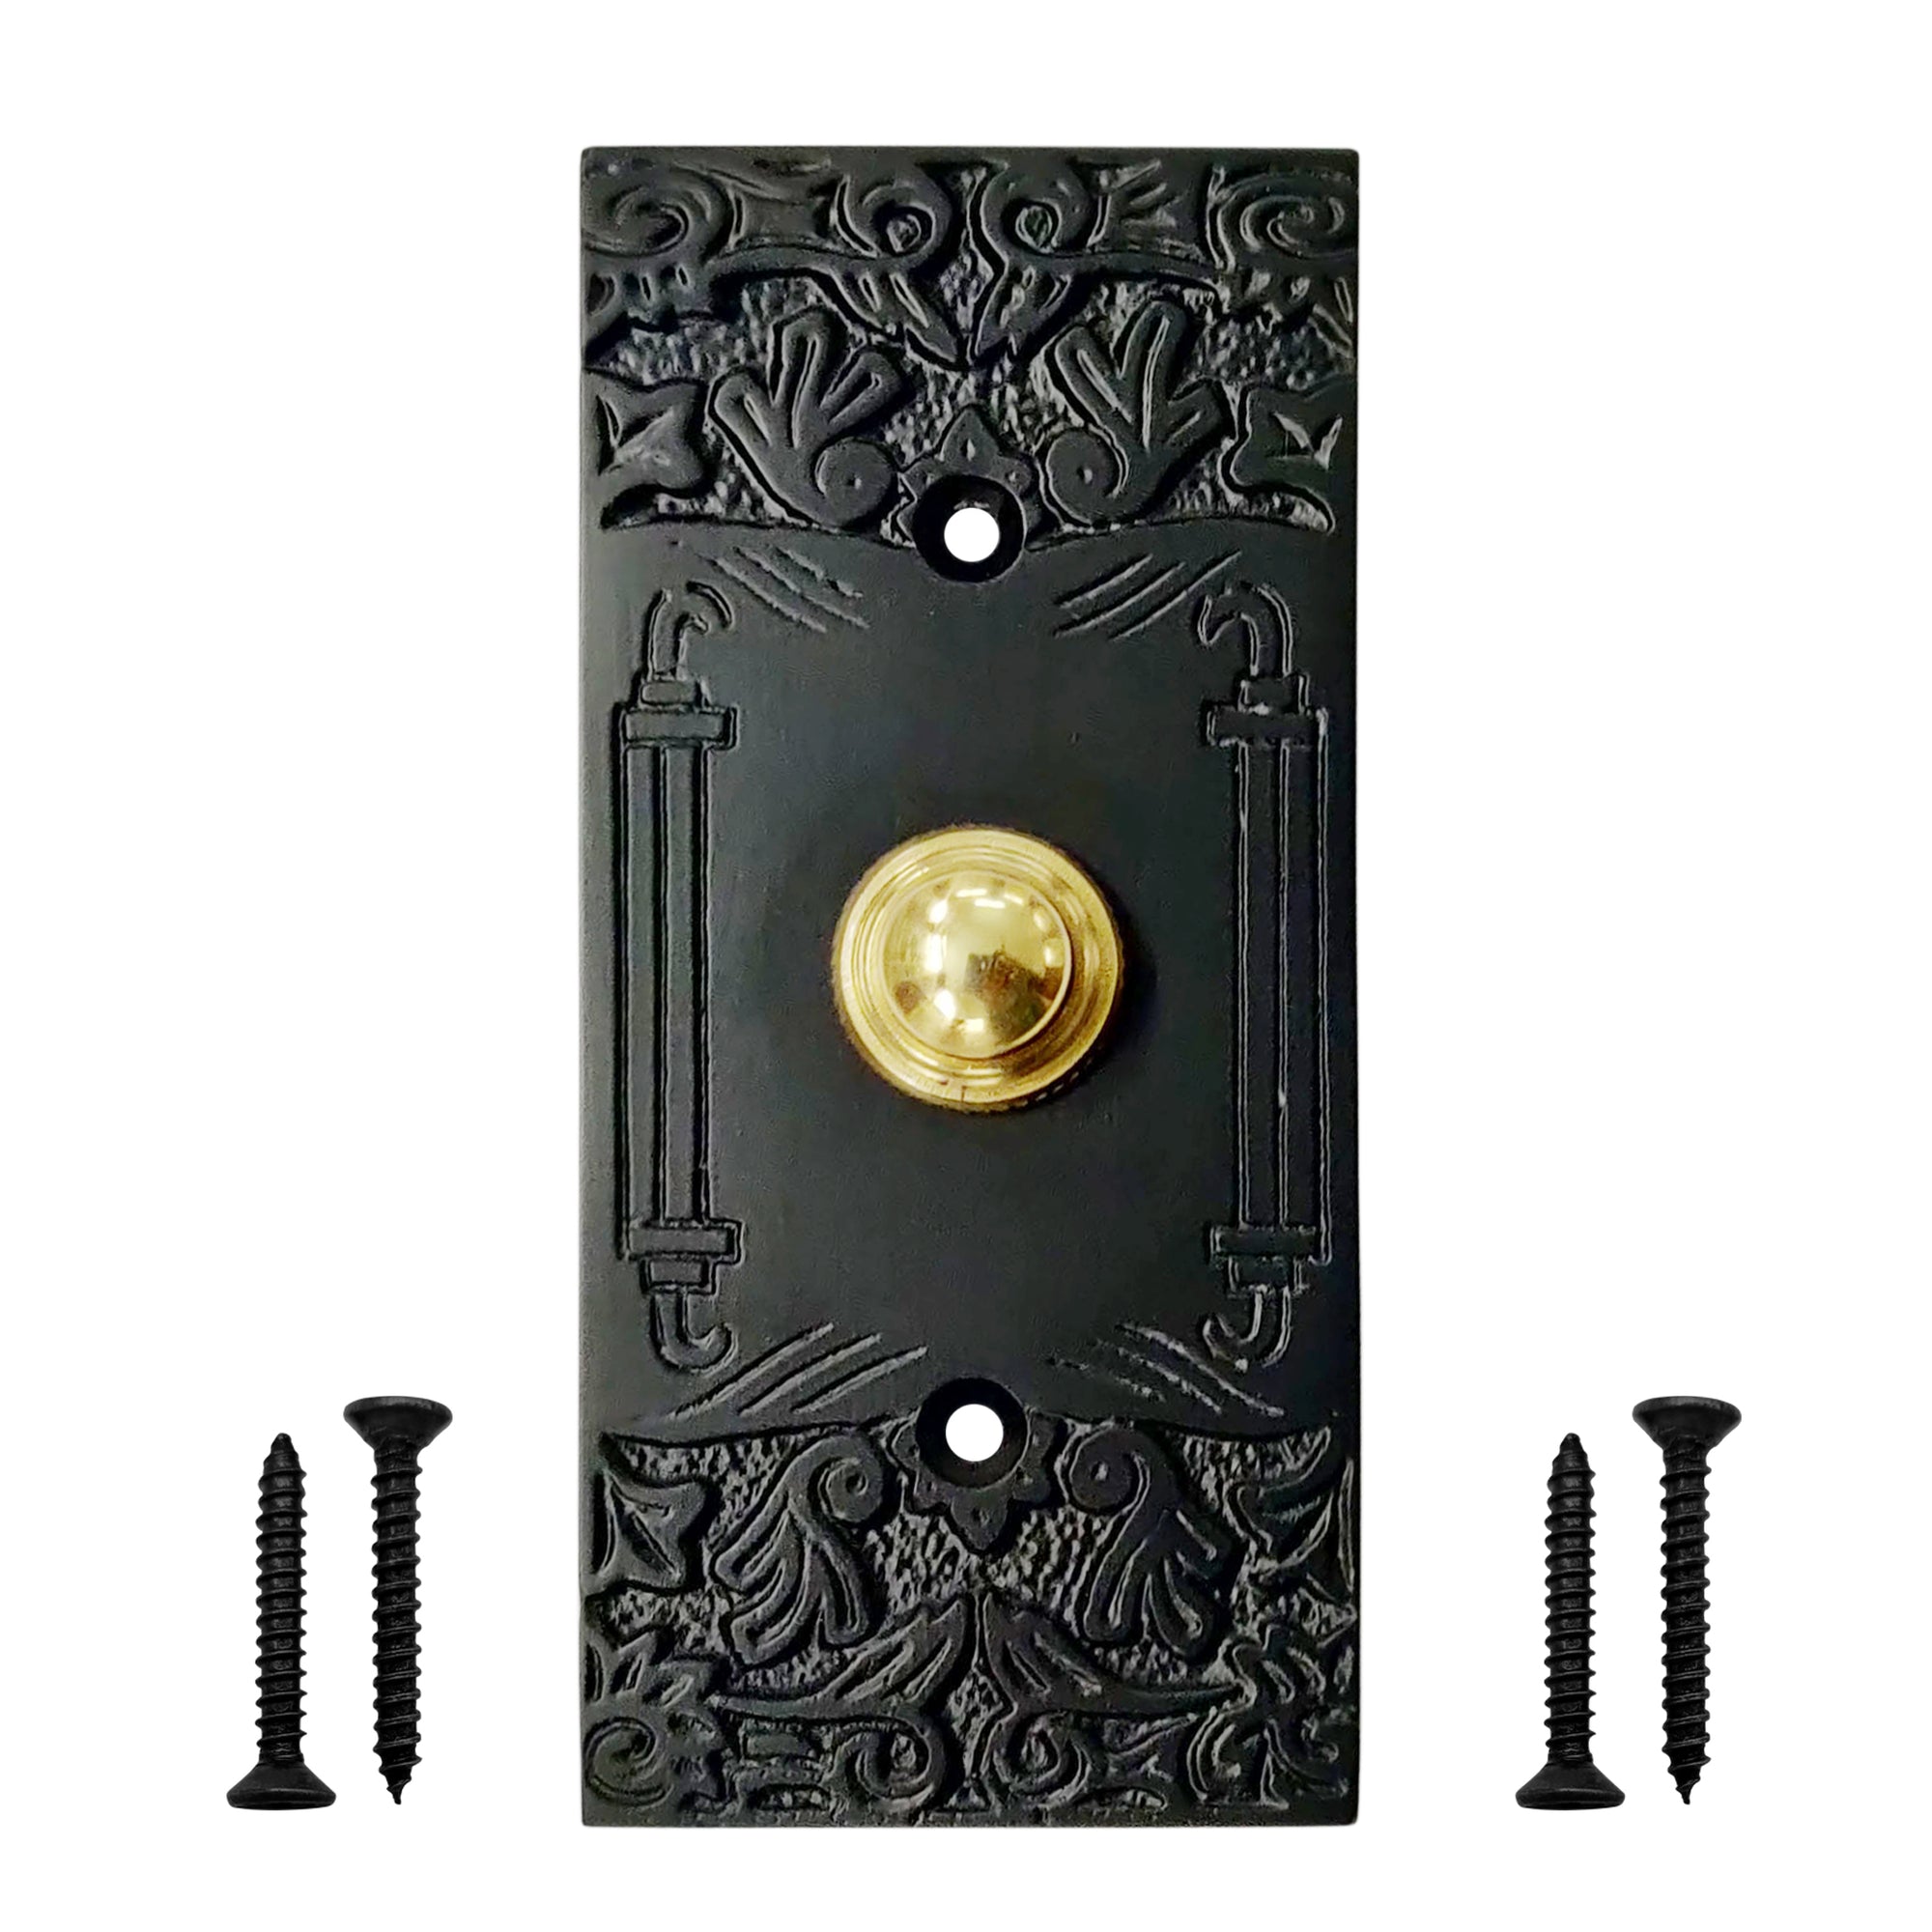 Decorative Doorbell Button – Finest Quality Bell Push Button – Easy to Install Calling Bell Button – Antique Black